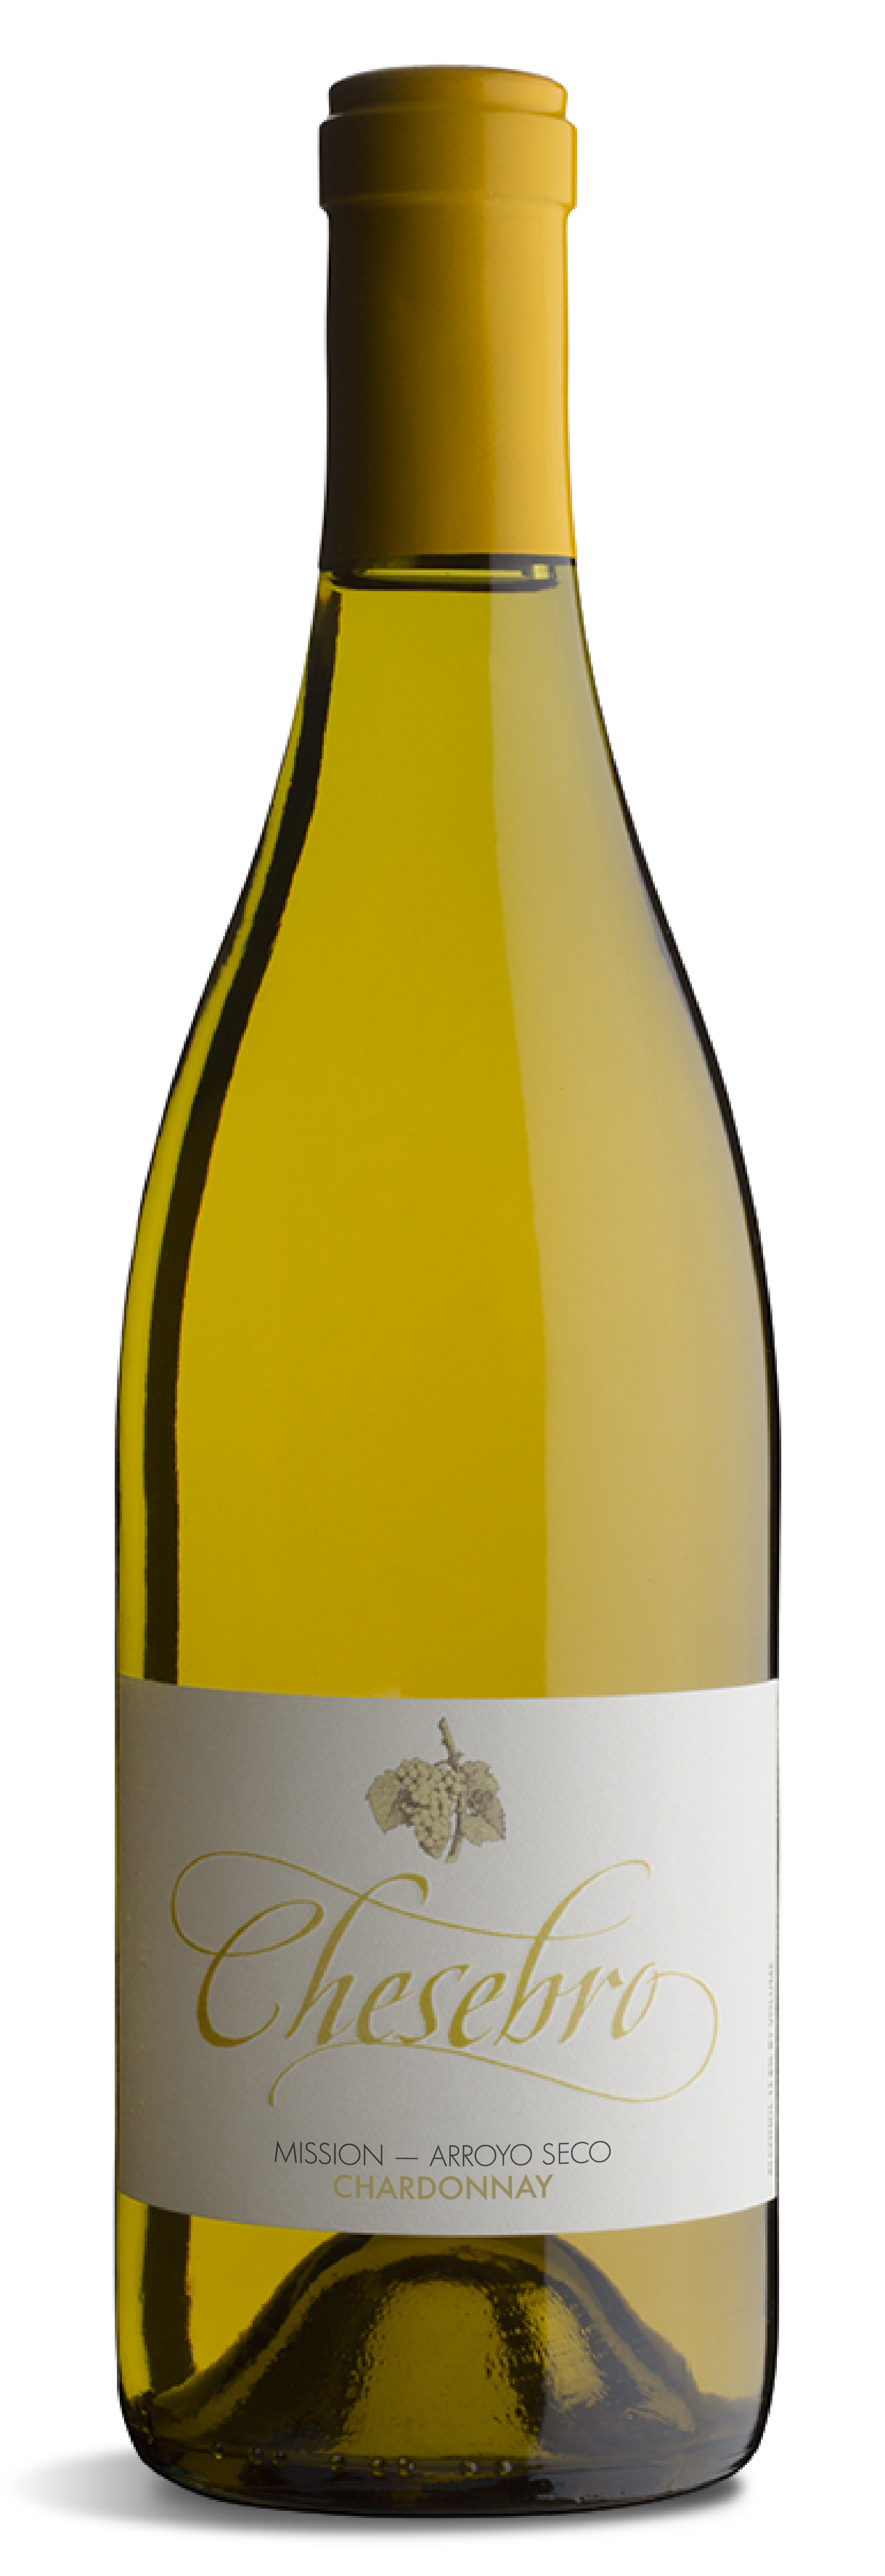 Product Image for Chardonnay - Mission - Arroyo Seco-2016